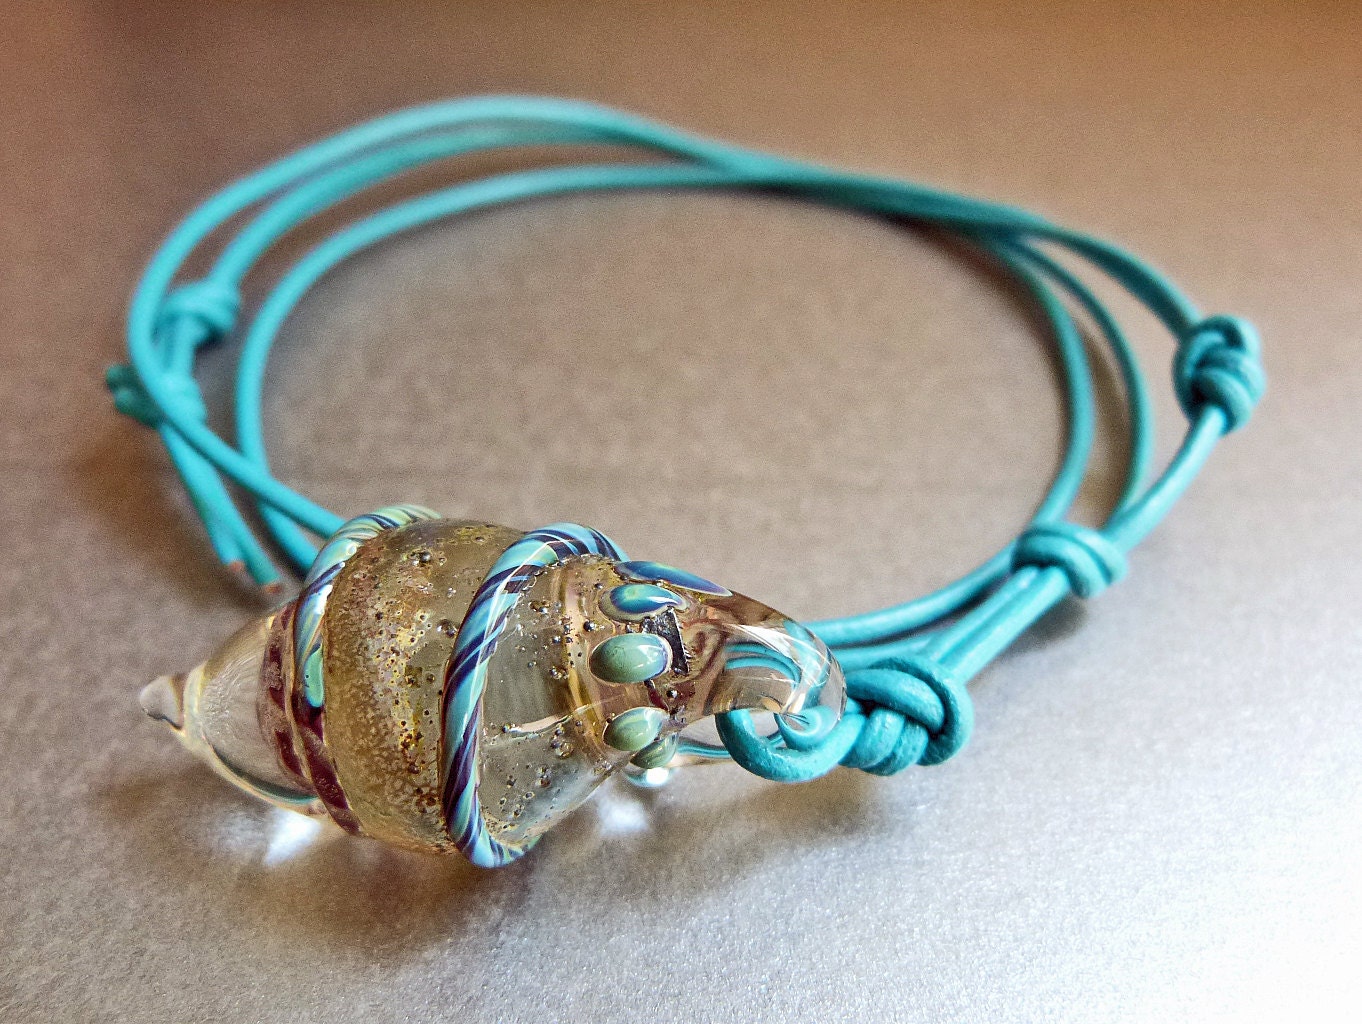 Hand Blown Glass Pendant Necklace, Turquoise Leather Cord - SivaniJewelry